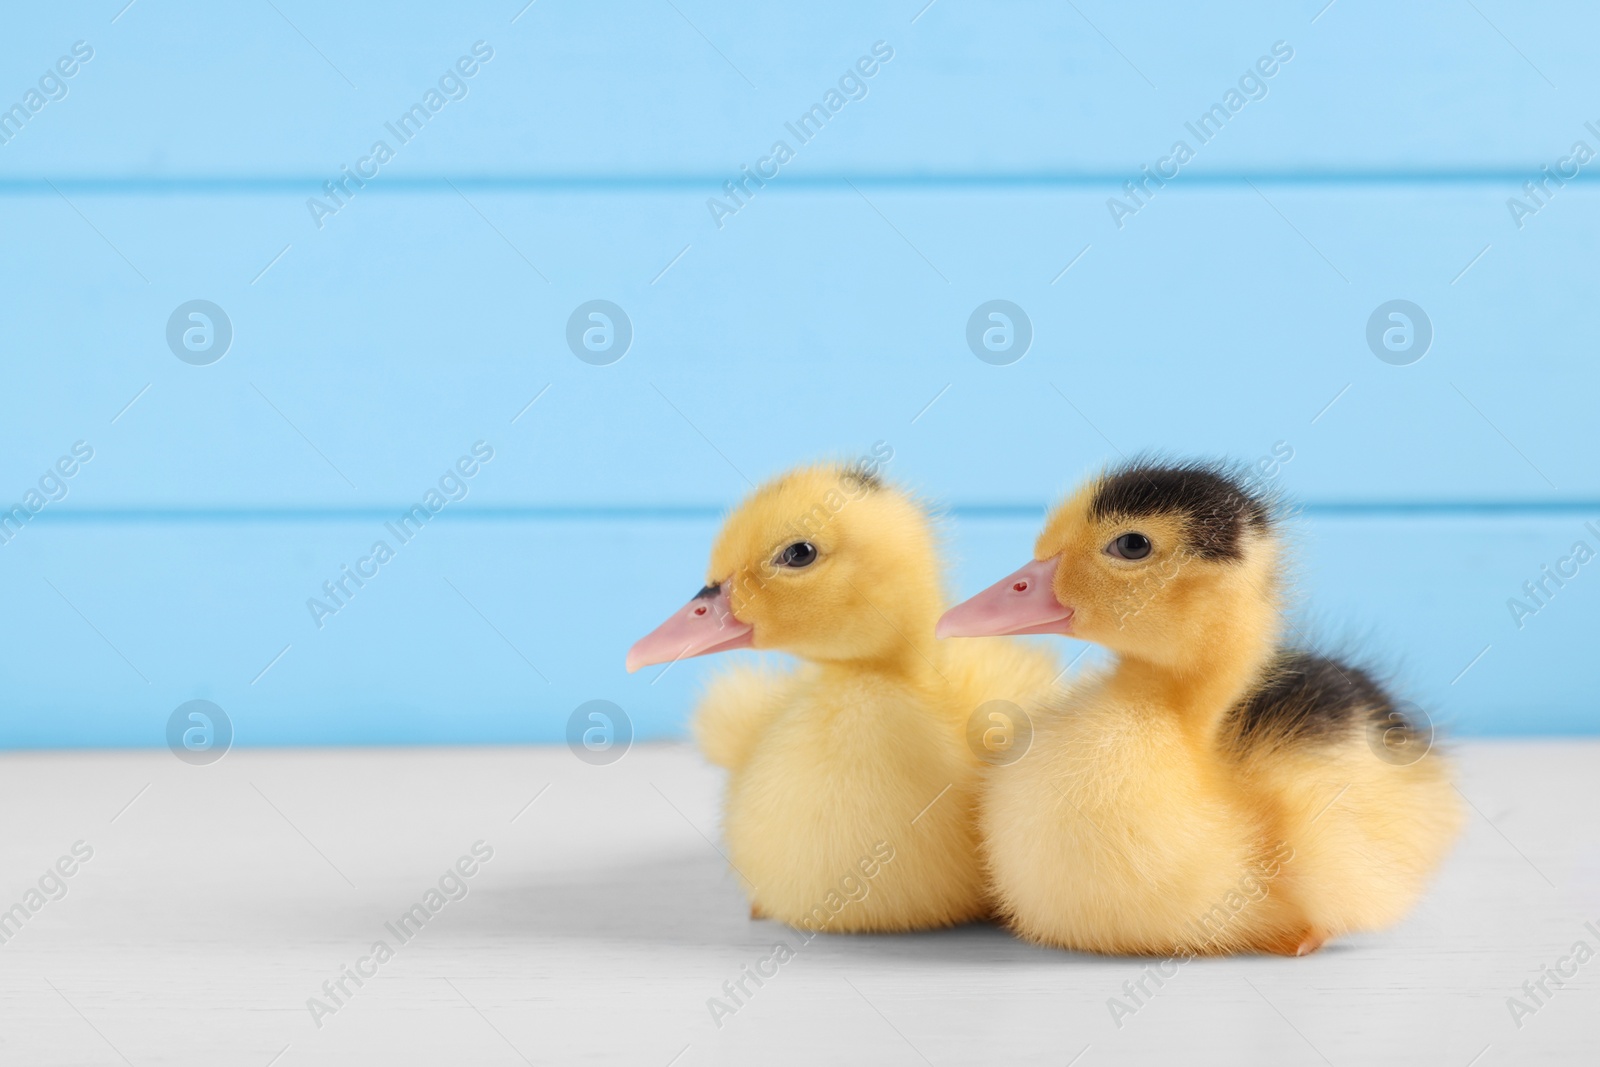 Photo of Baby animals. Cute fluffy ducklings on white wooden table near light blue wall, space for text